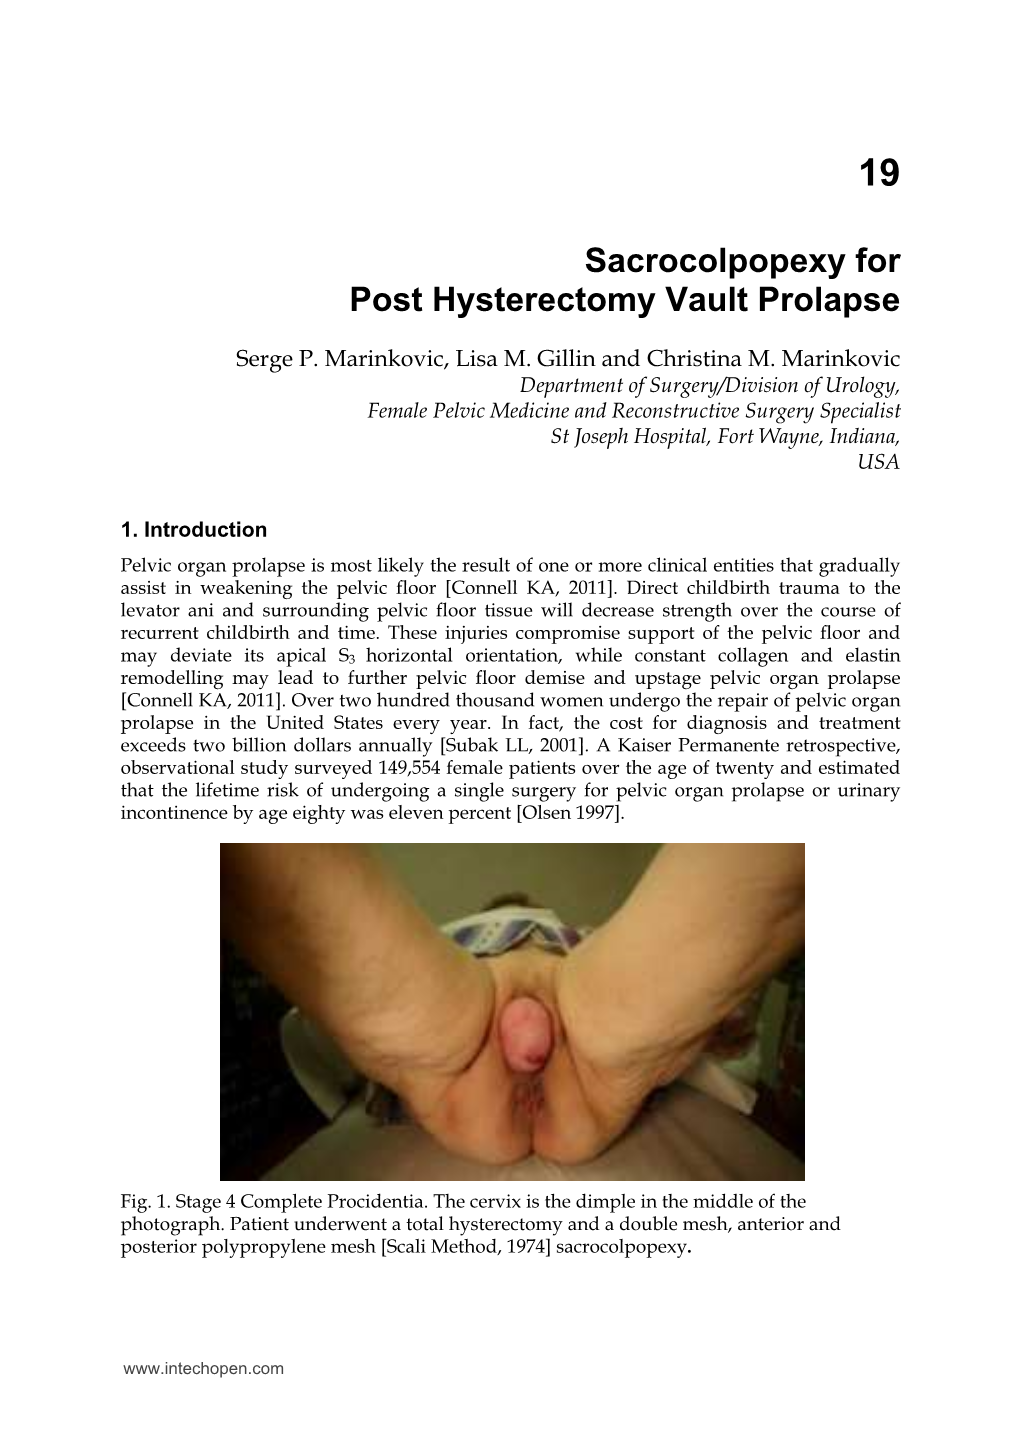 Sacrocolpopexy for Post Hysterectomy Vault Prolapse